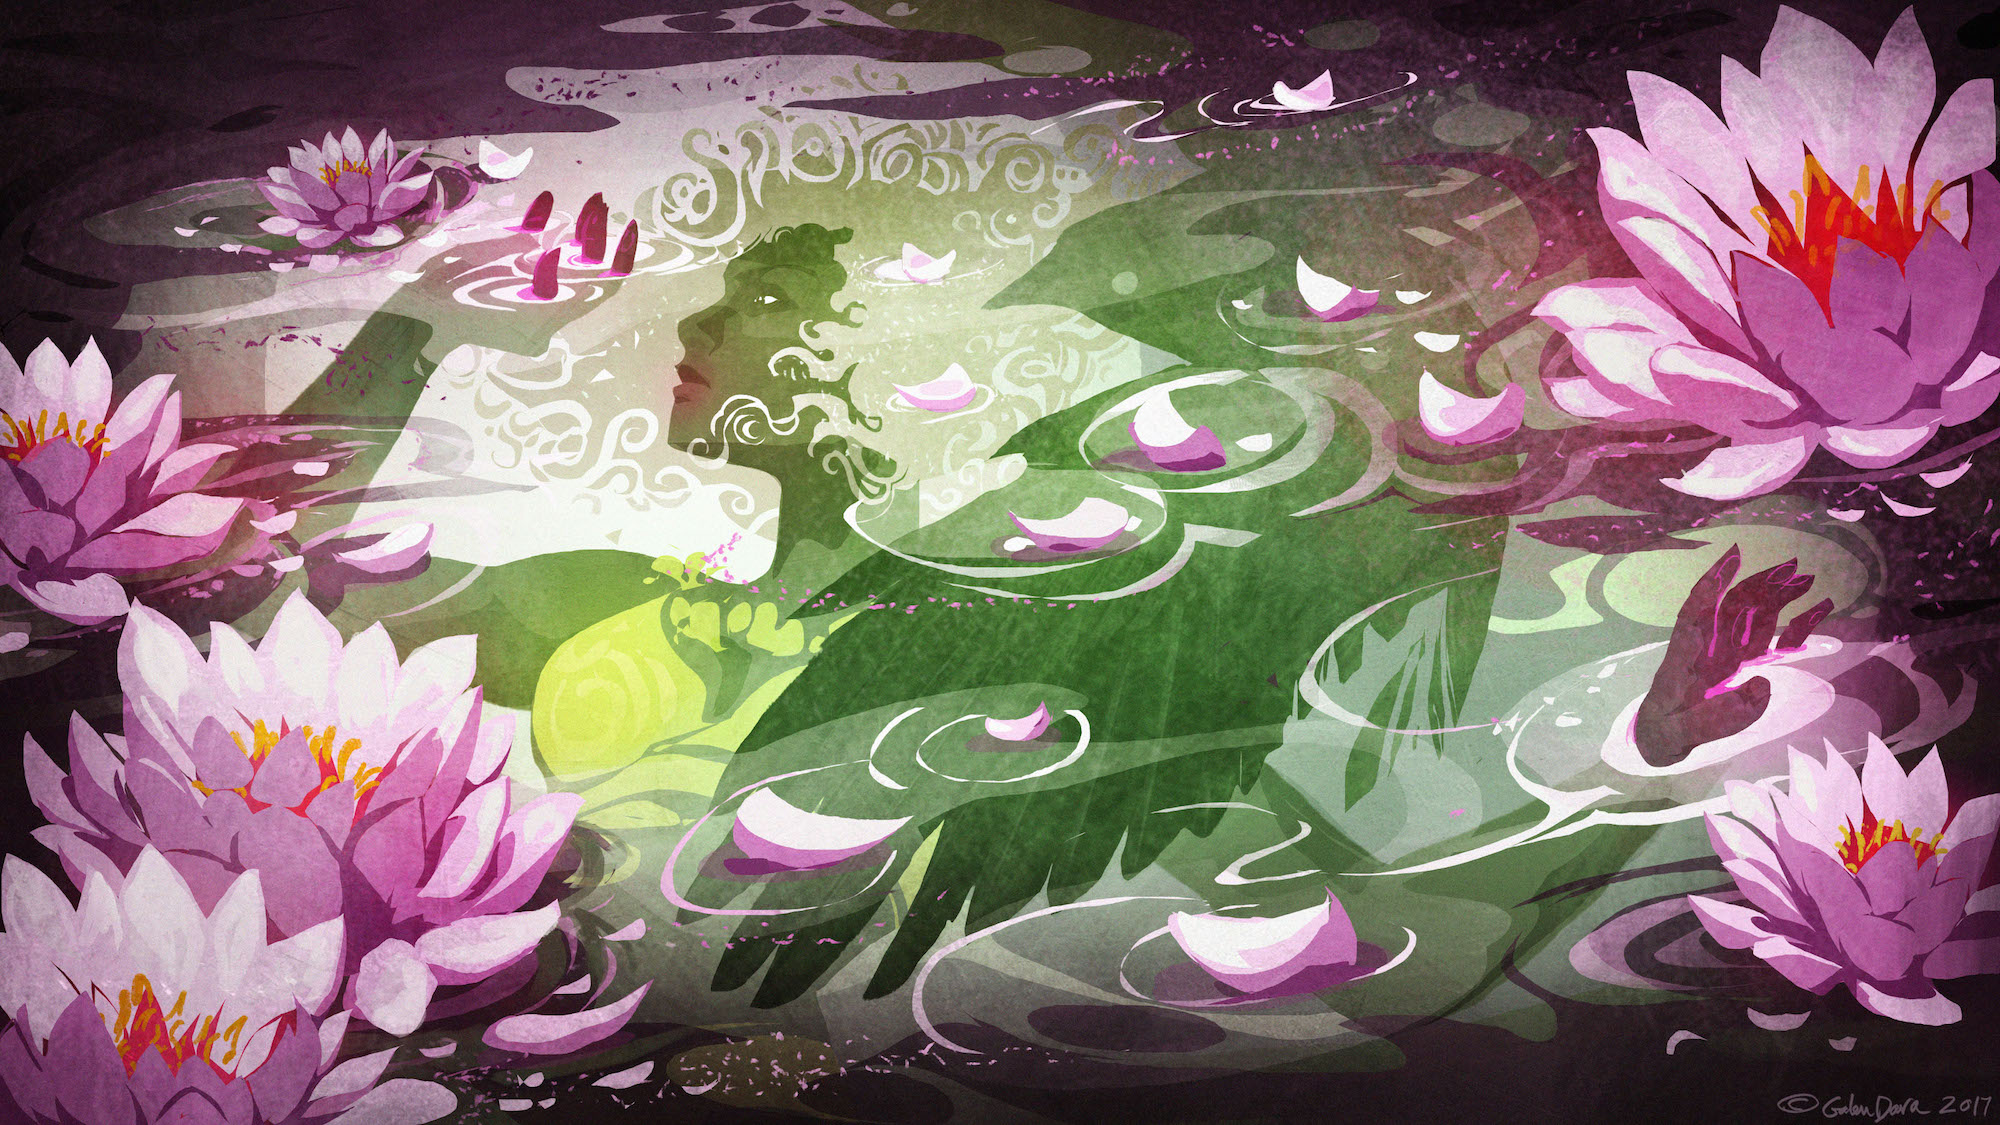 A teen girl floats beneath the surface of the water, surrounded by floating pink water lilies and overshadowed by the silhouette of a crow.